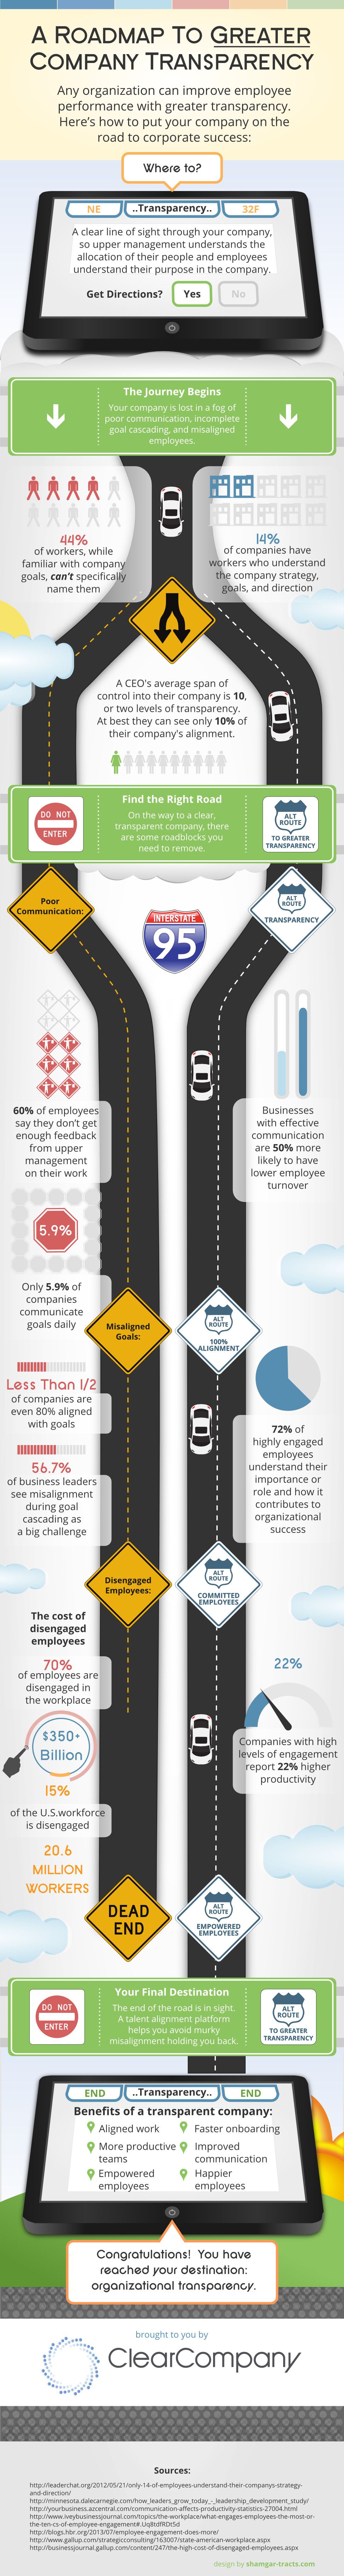 A Roadmap to Greater Company Transparency [Infographic]